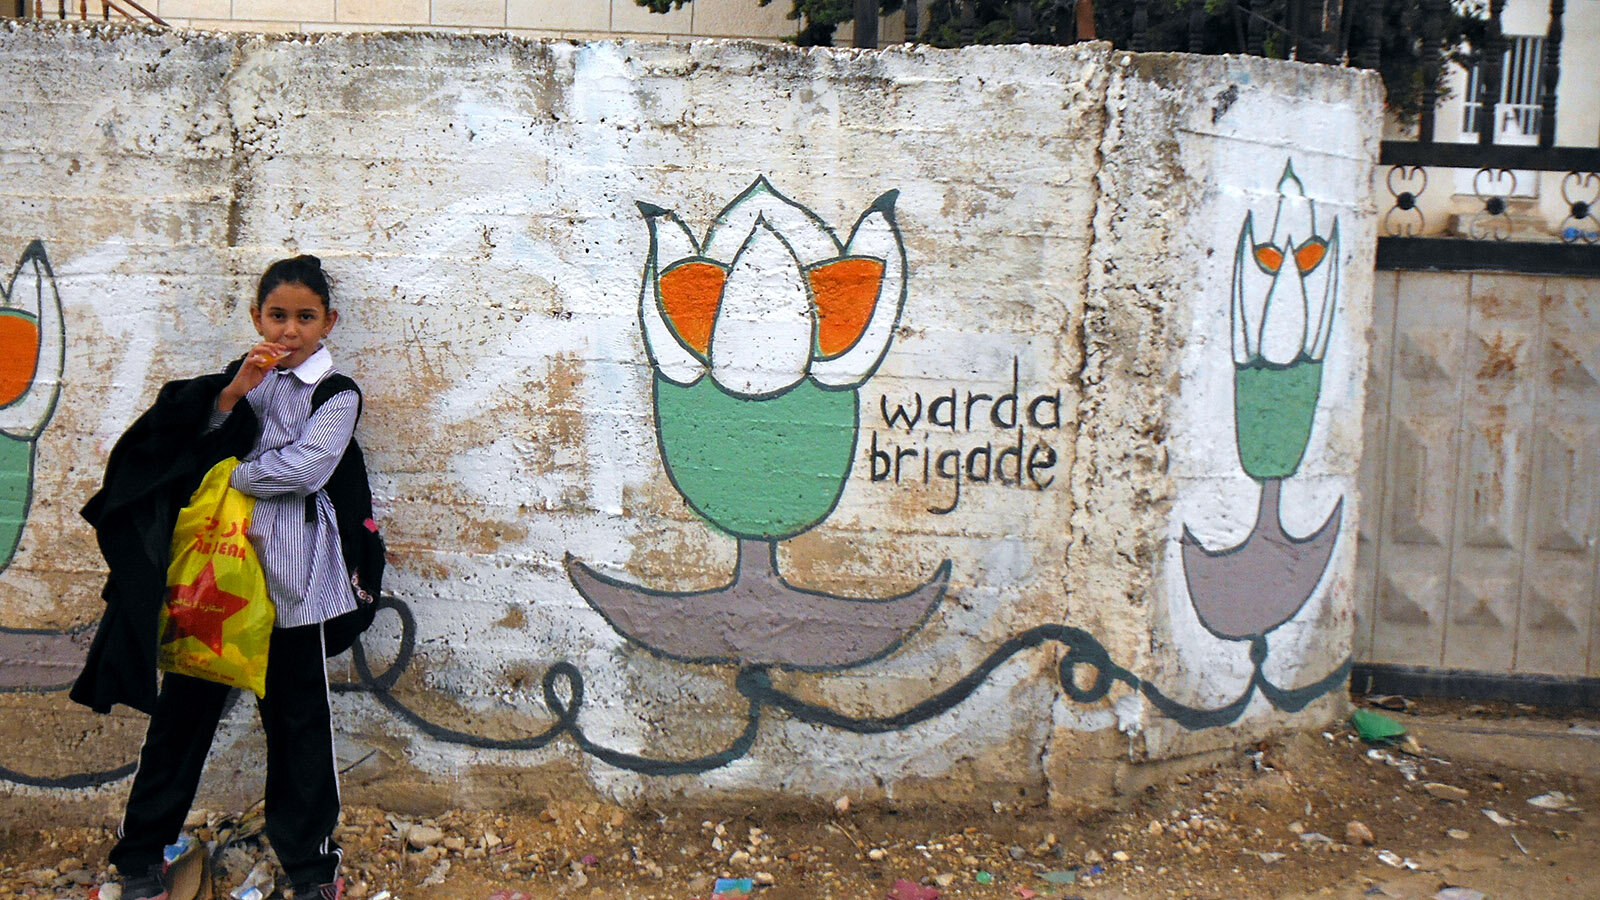 The Warda (Flower) Brigade continues to be a creative force for anti-Occupation protest in Bil'in.